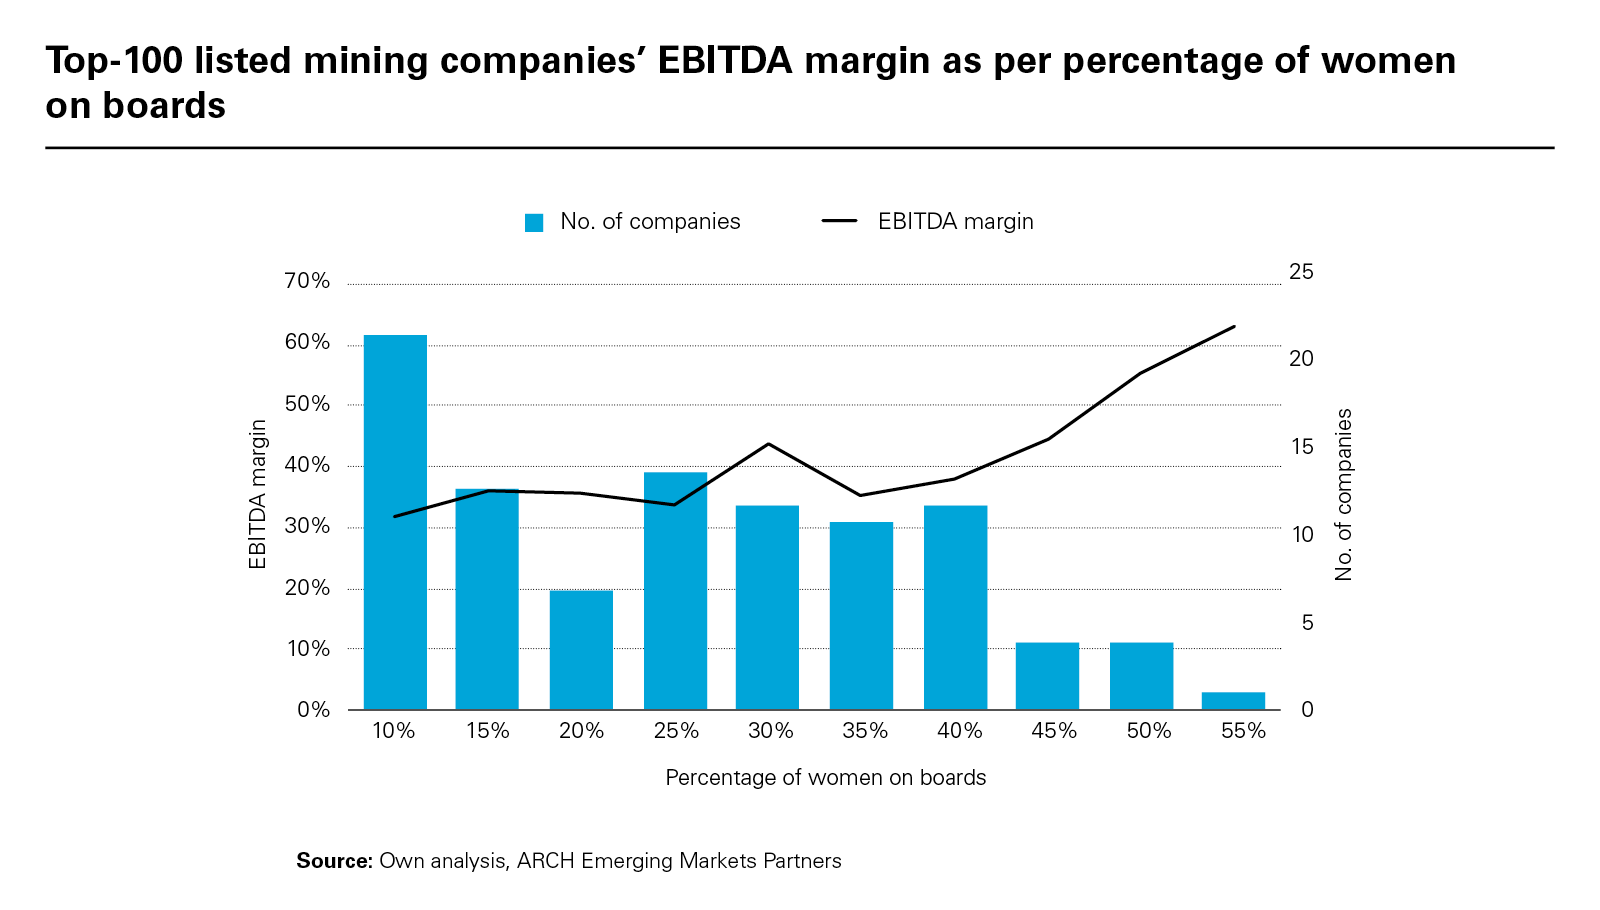 Top-100 listed mining companies’ EBITDA margin as per percentage of women on boards